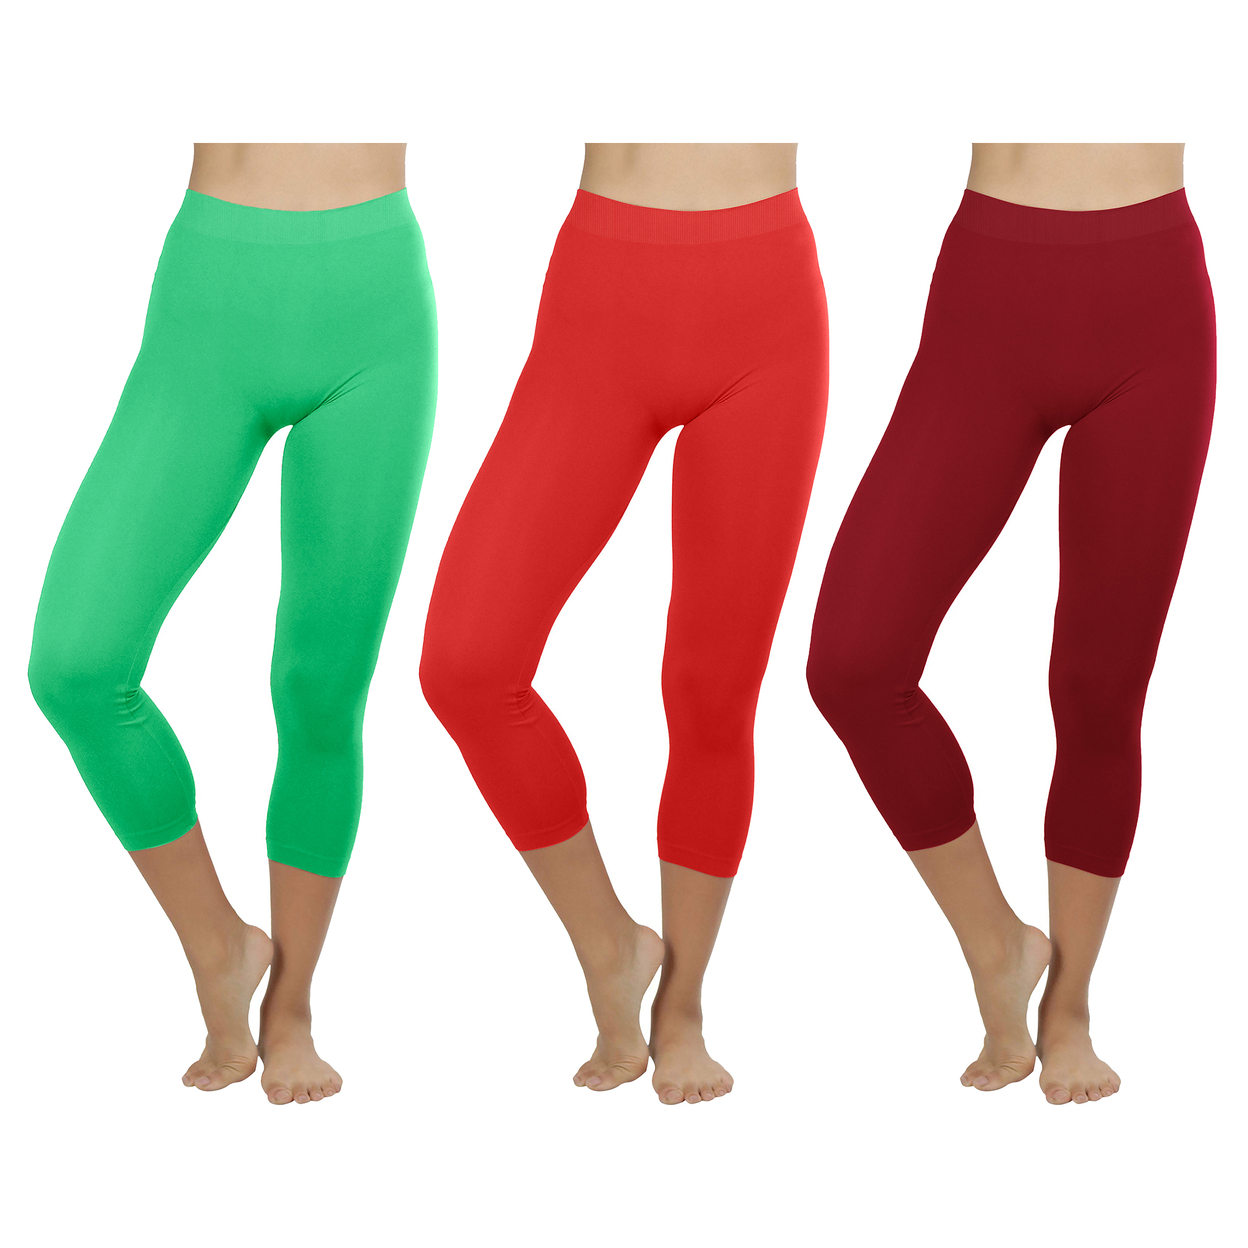 2-Pack: Women's Ultra-Soft High Waisted Smooth Stretch Active Yoga Capri Leggings - Green &red, Large